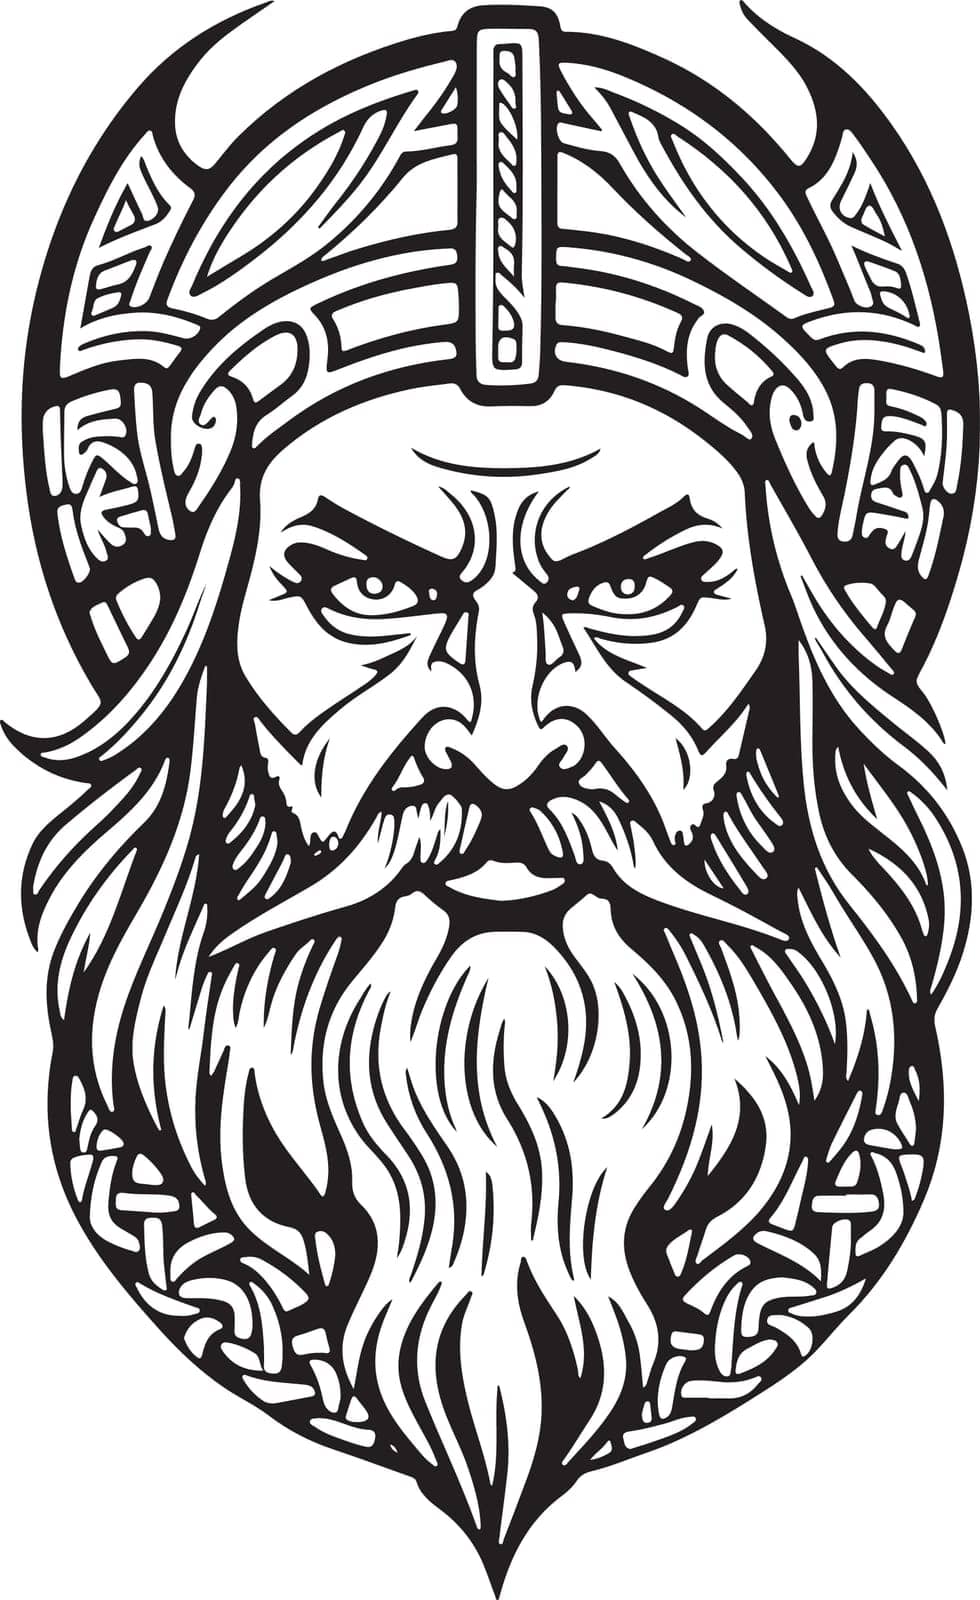 Incredible line art style Viking head vector graphic template, Suitable for logo design, tattoo design or print on demand by luisalfonso89